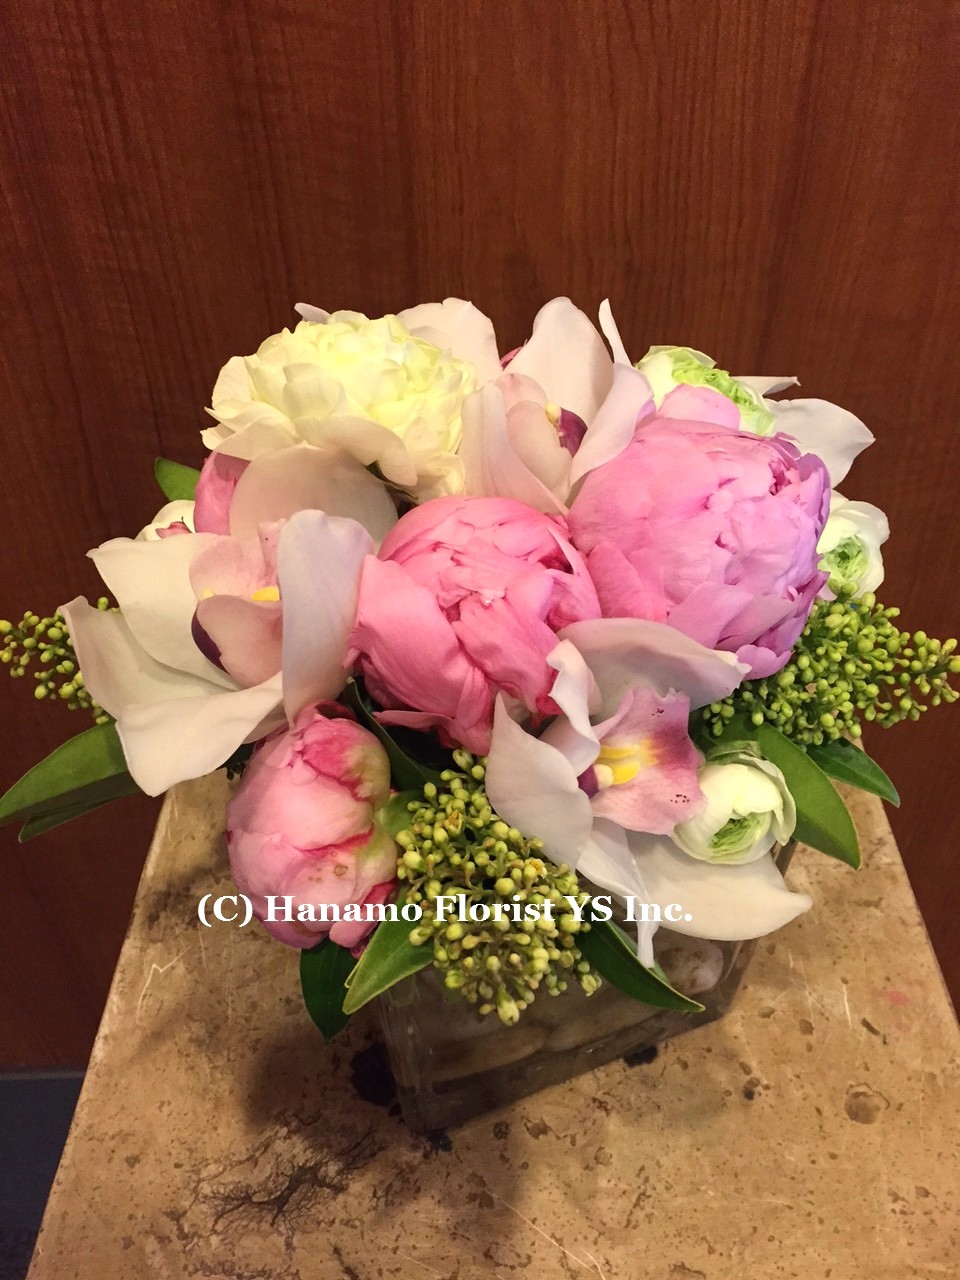 CUBE405 Peonies with seasonal flowers in a 5" glass Cube